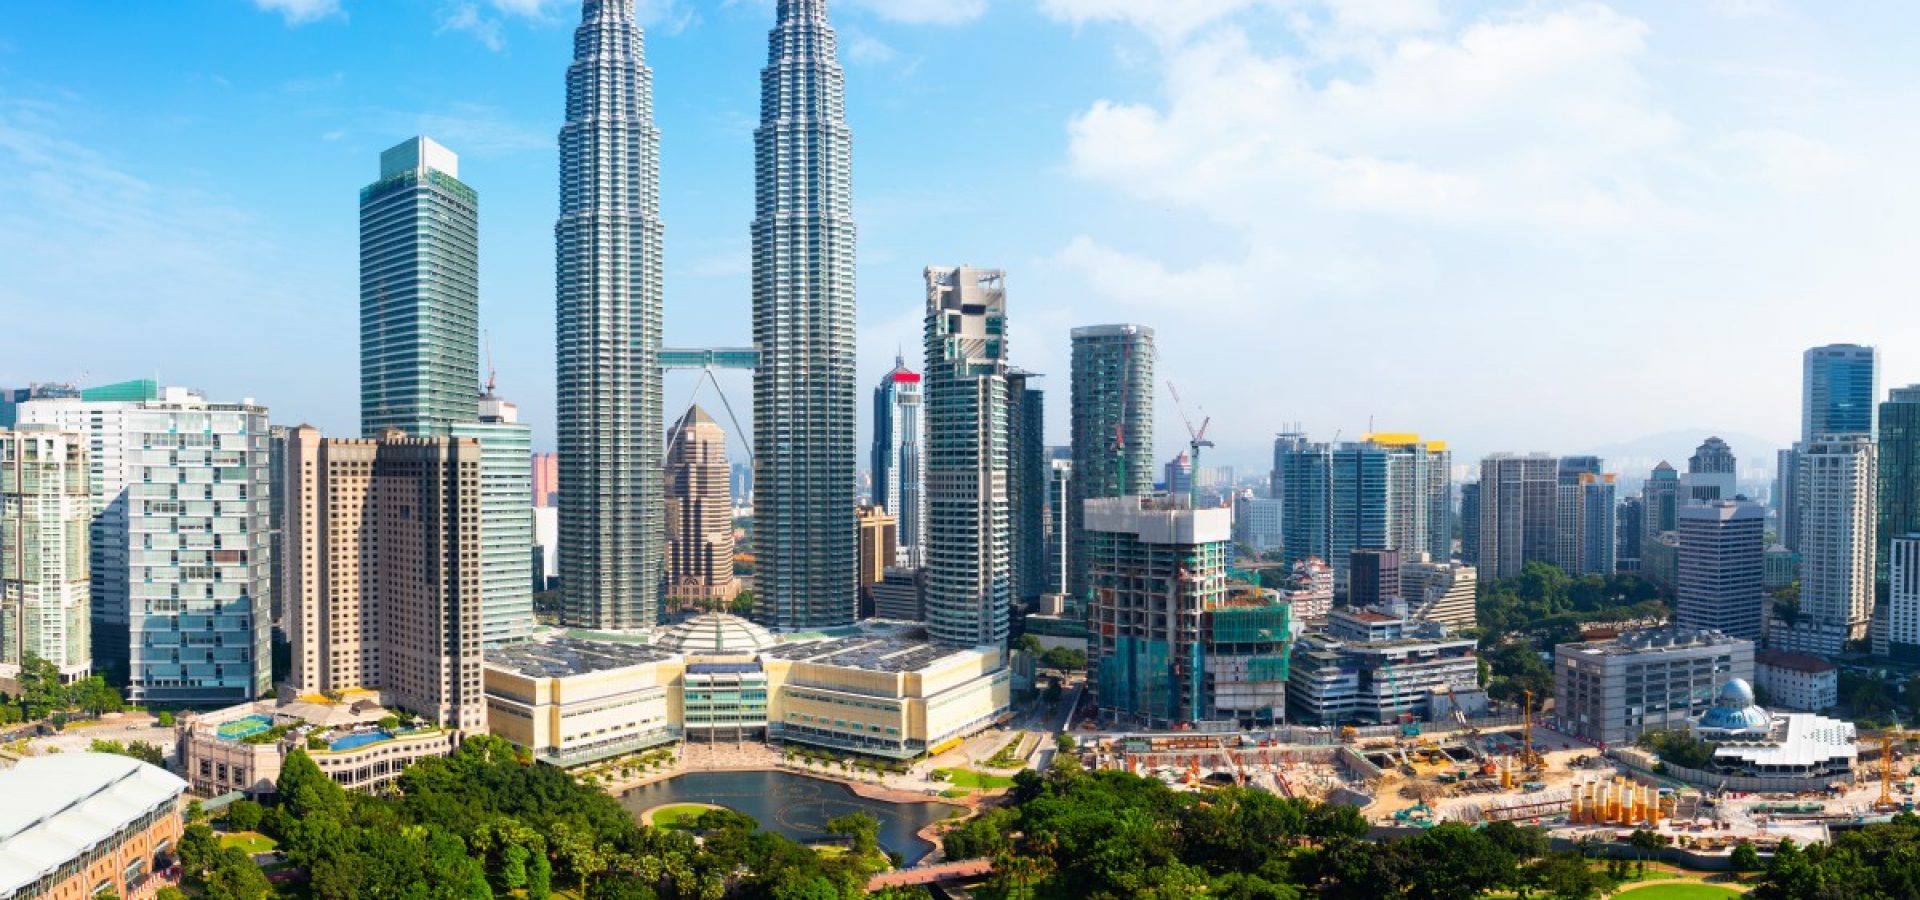 Malaysia and its challenges